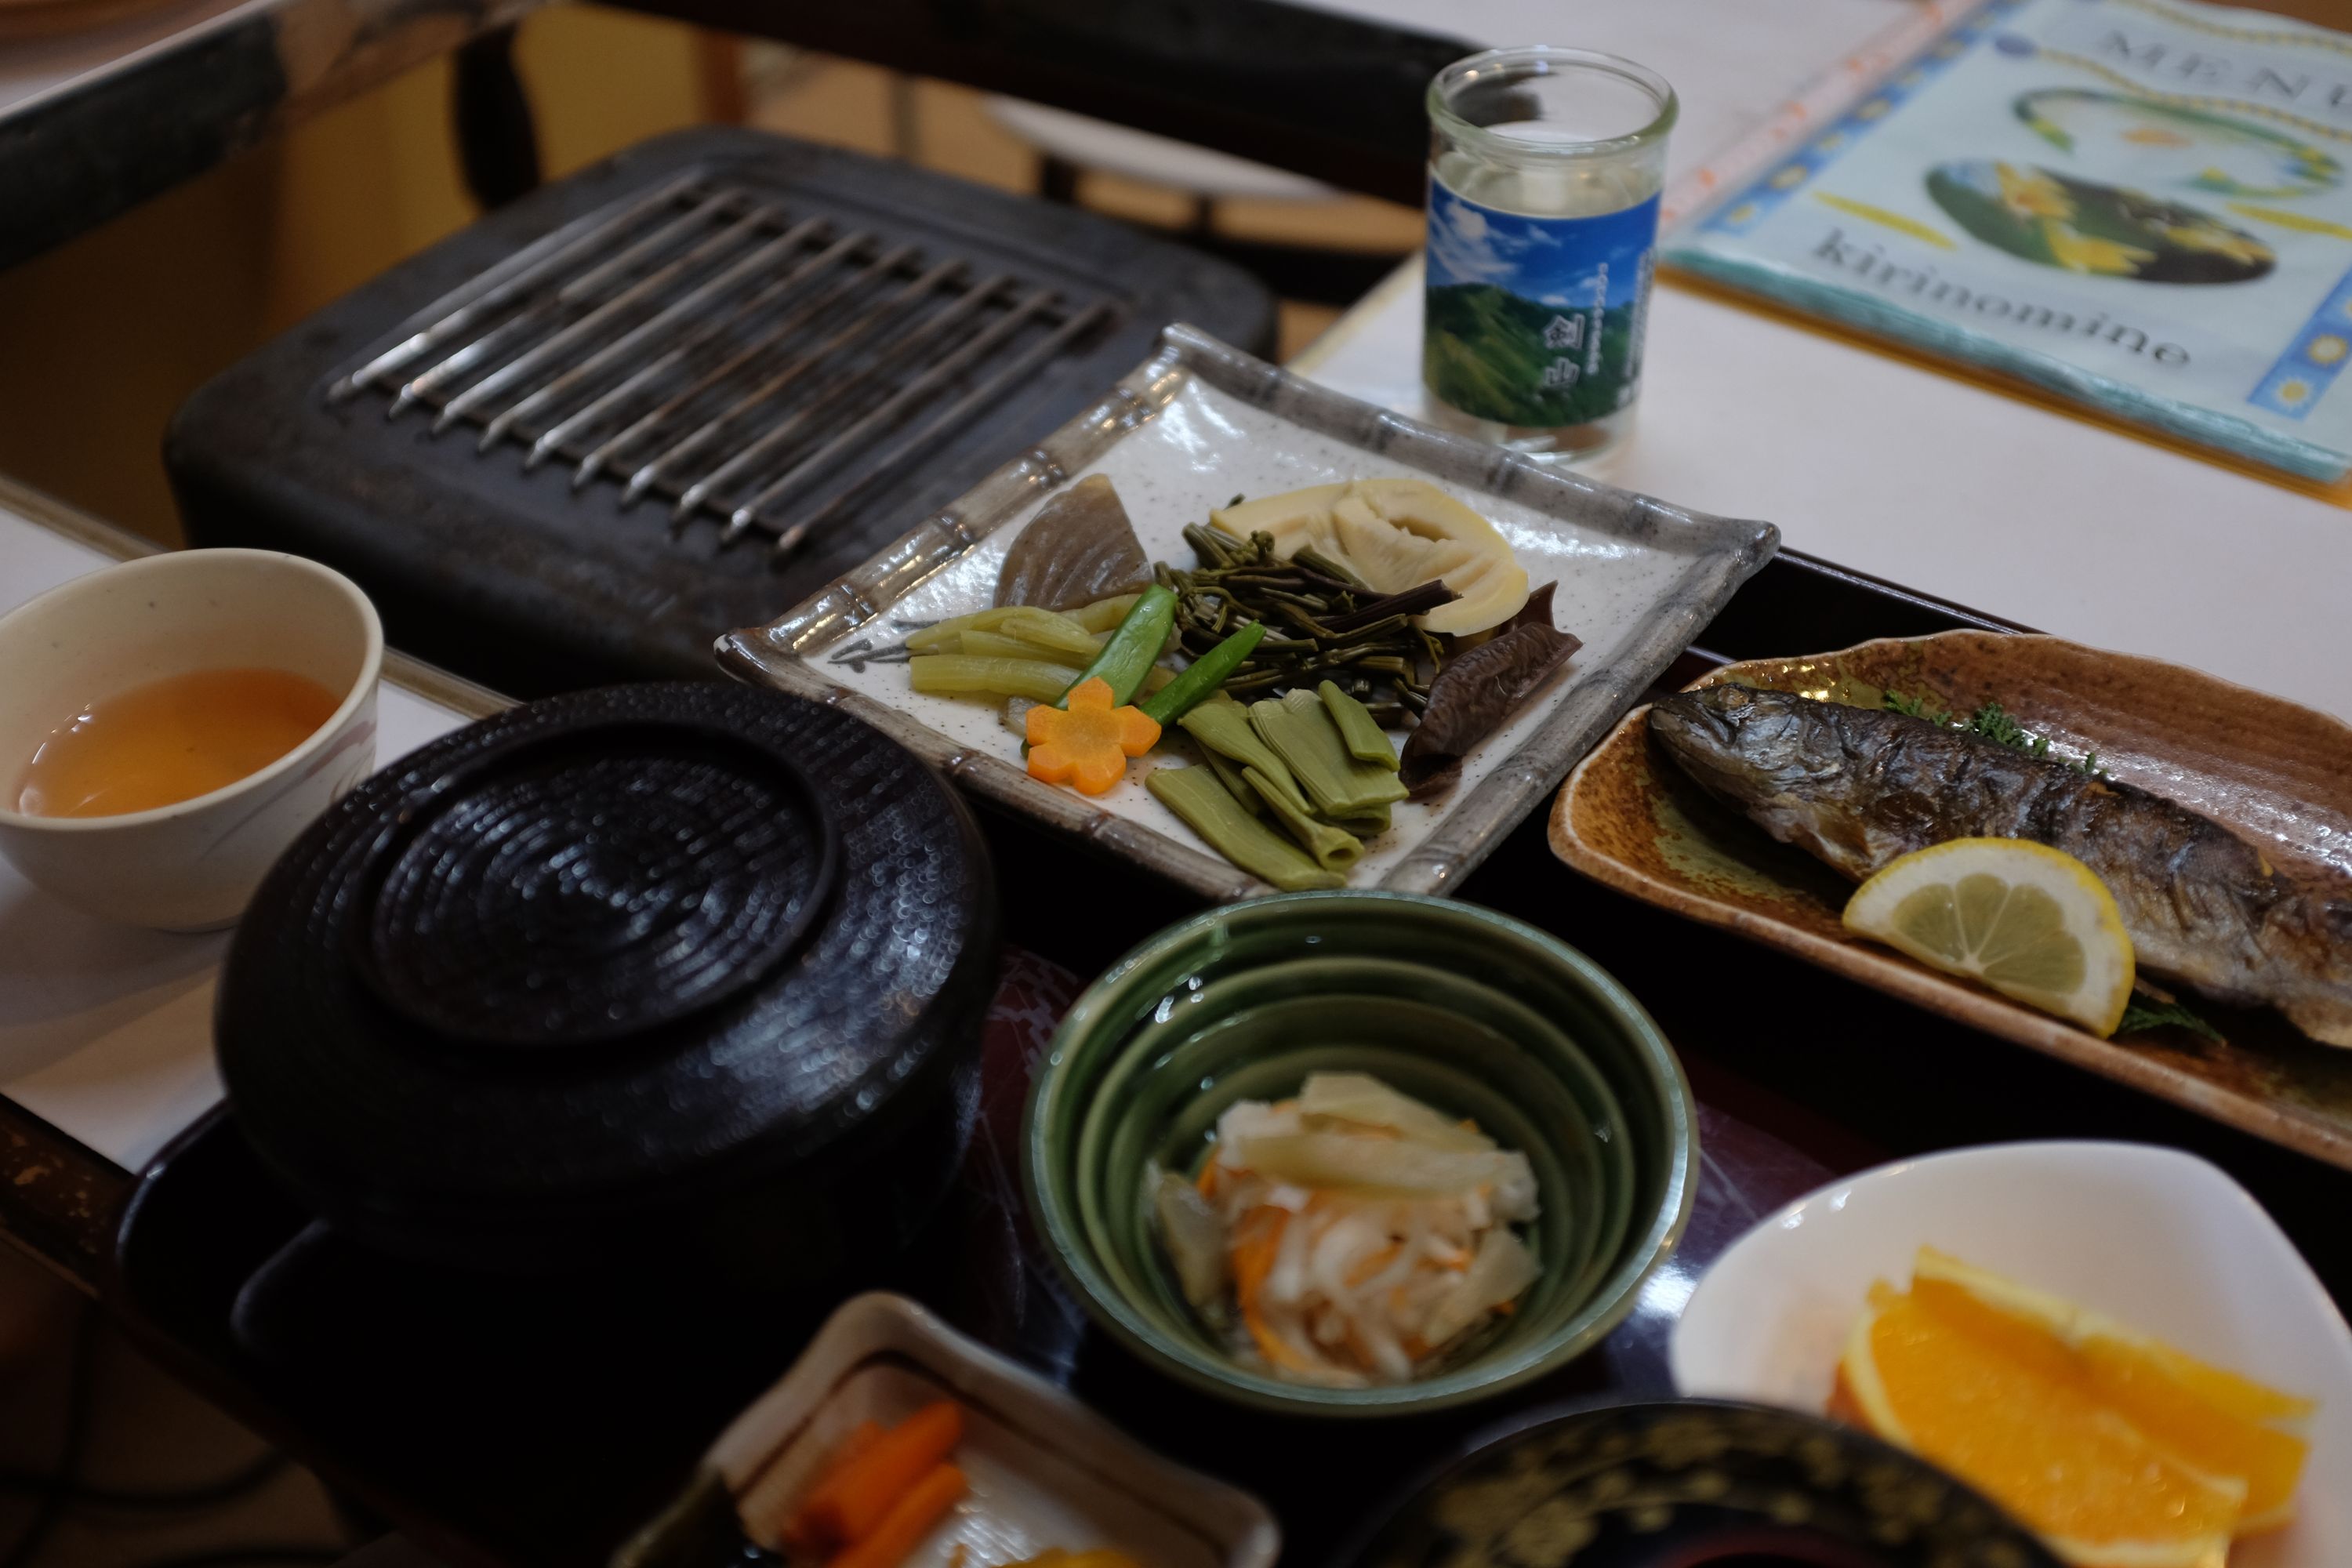 A lunch menu of vegetables, grilled fish, fruit, tea, and sake arranged on a table.